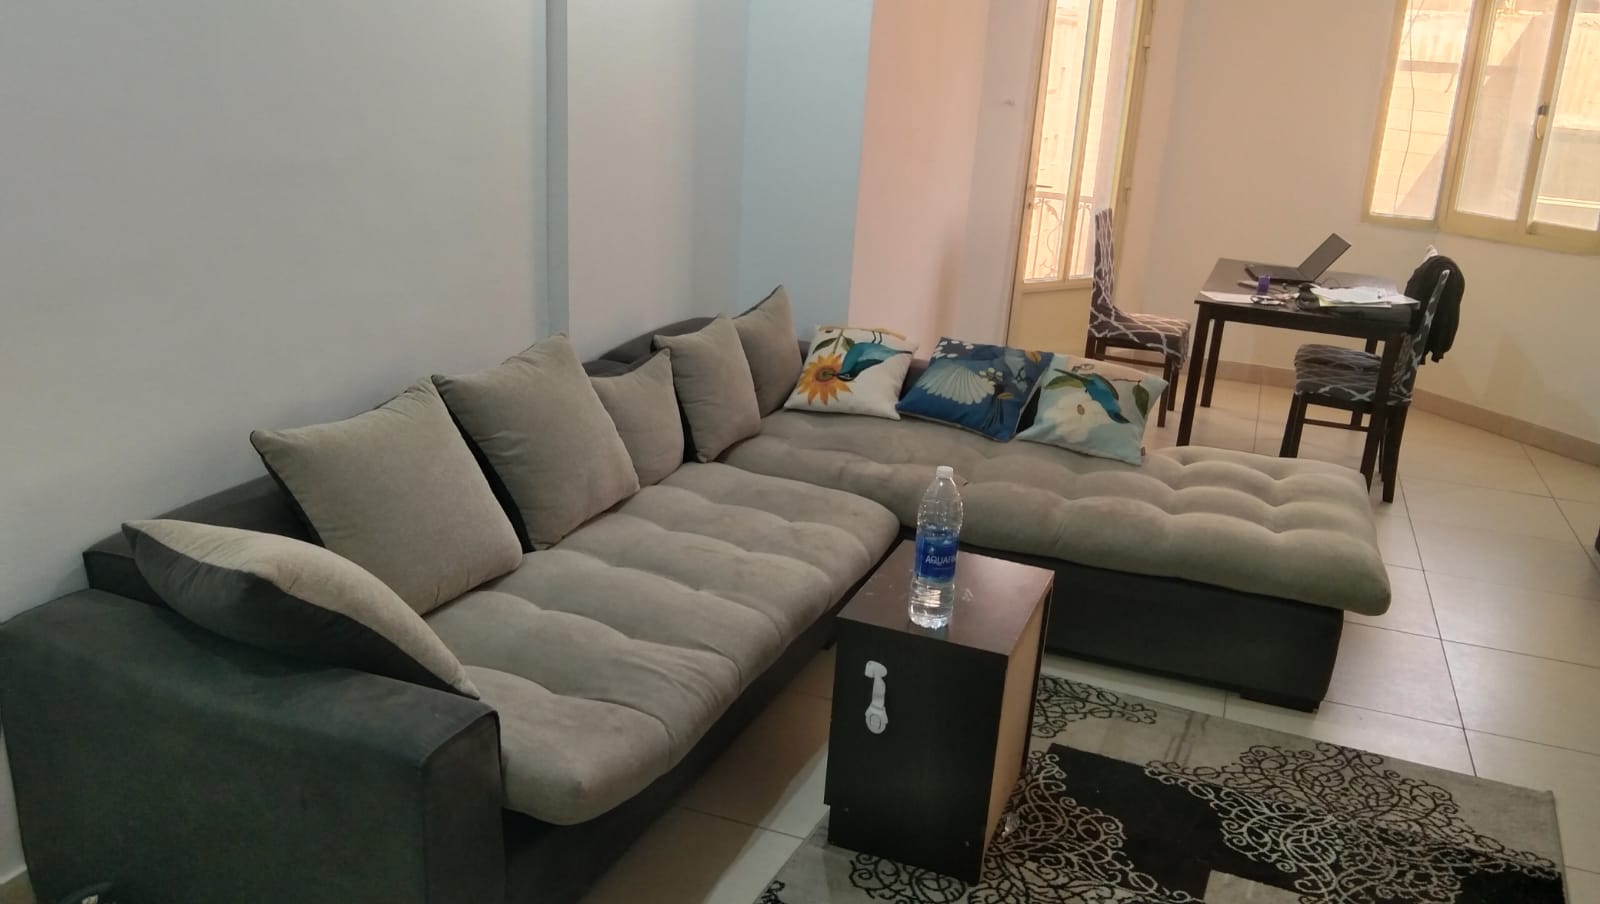 Home Furniture all items for Urgent Sale